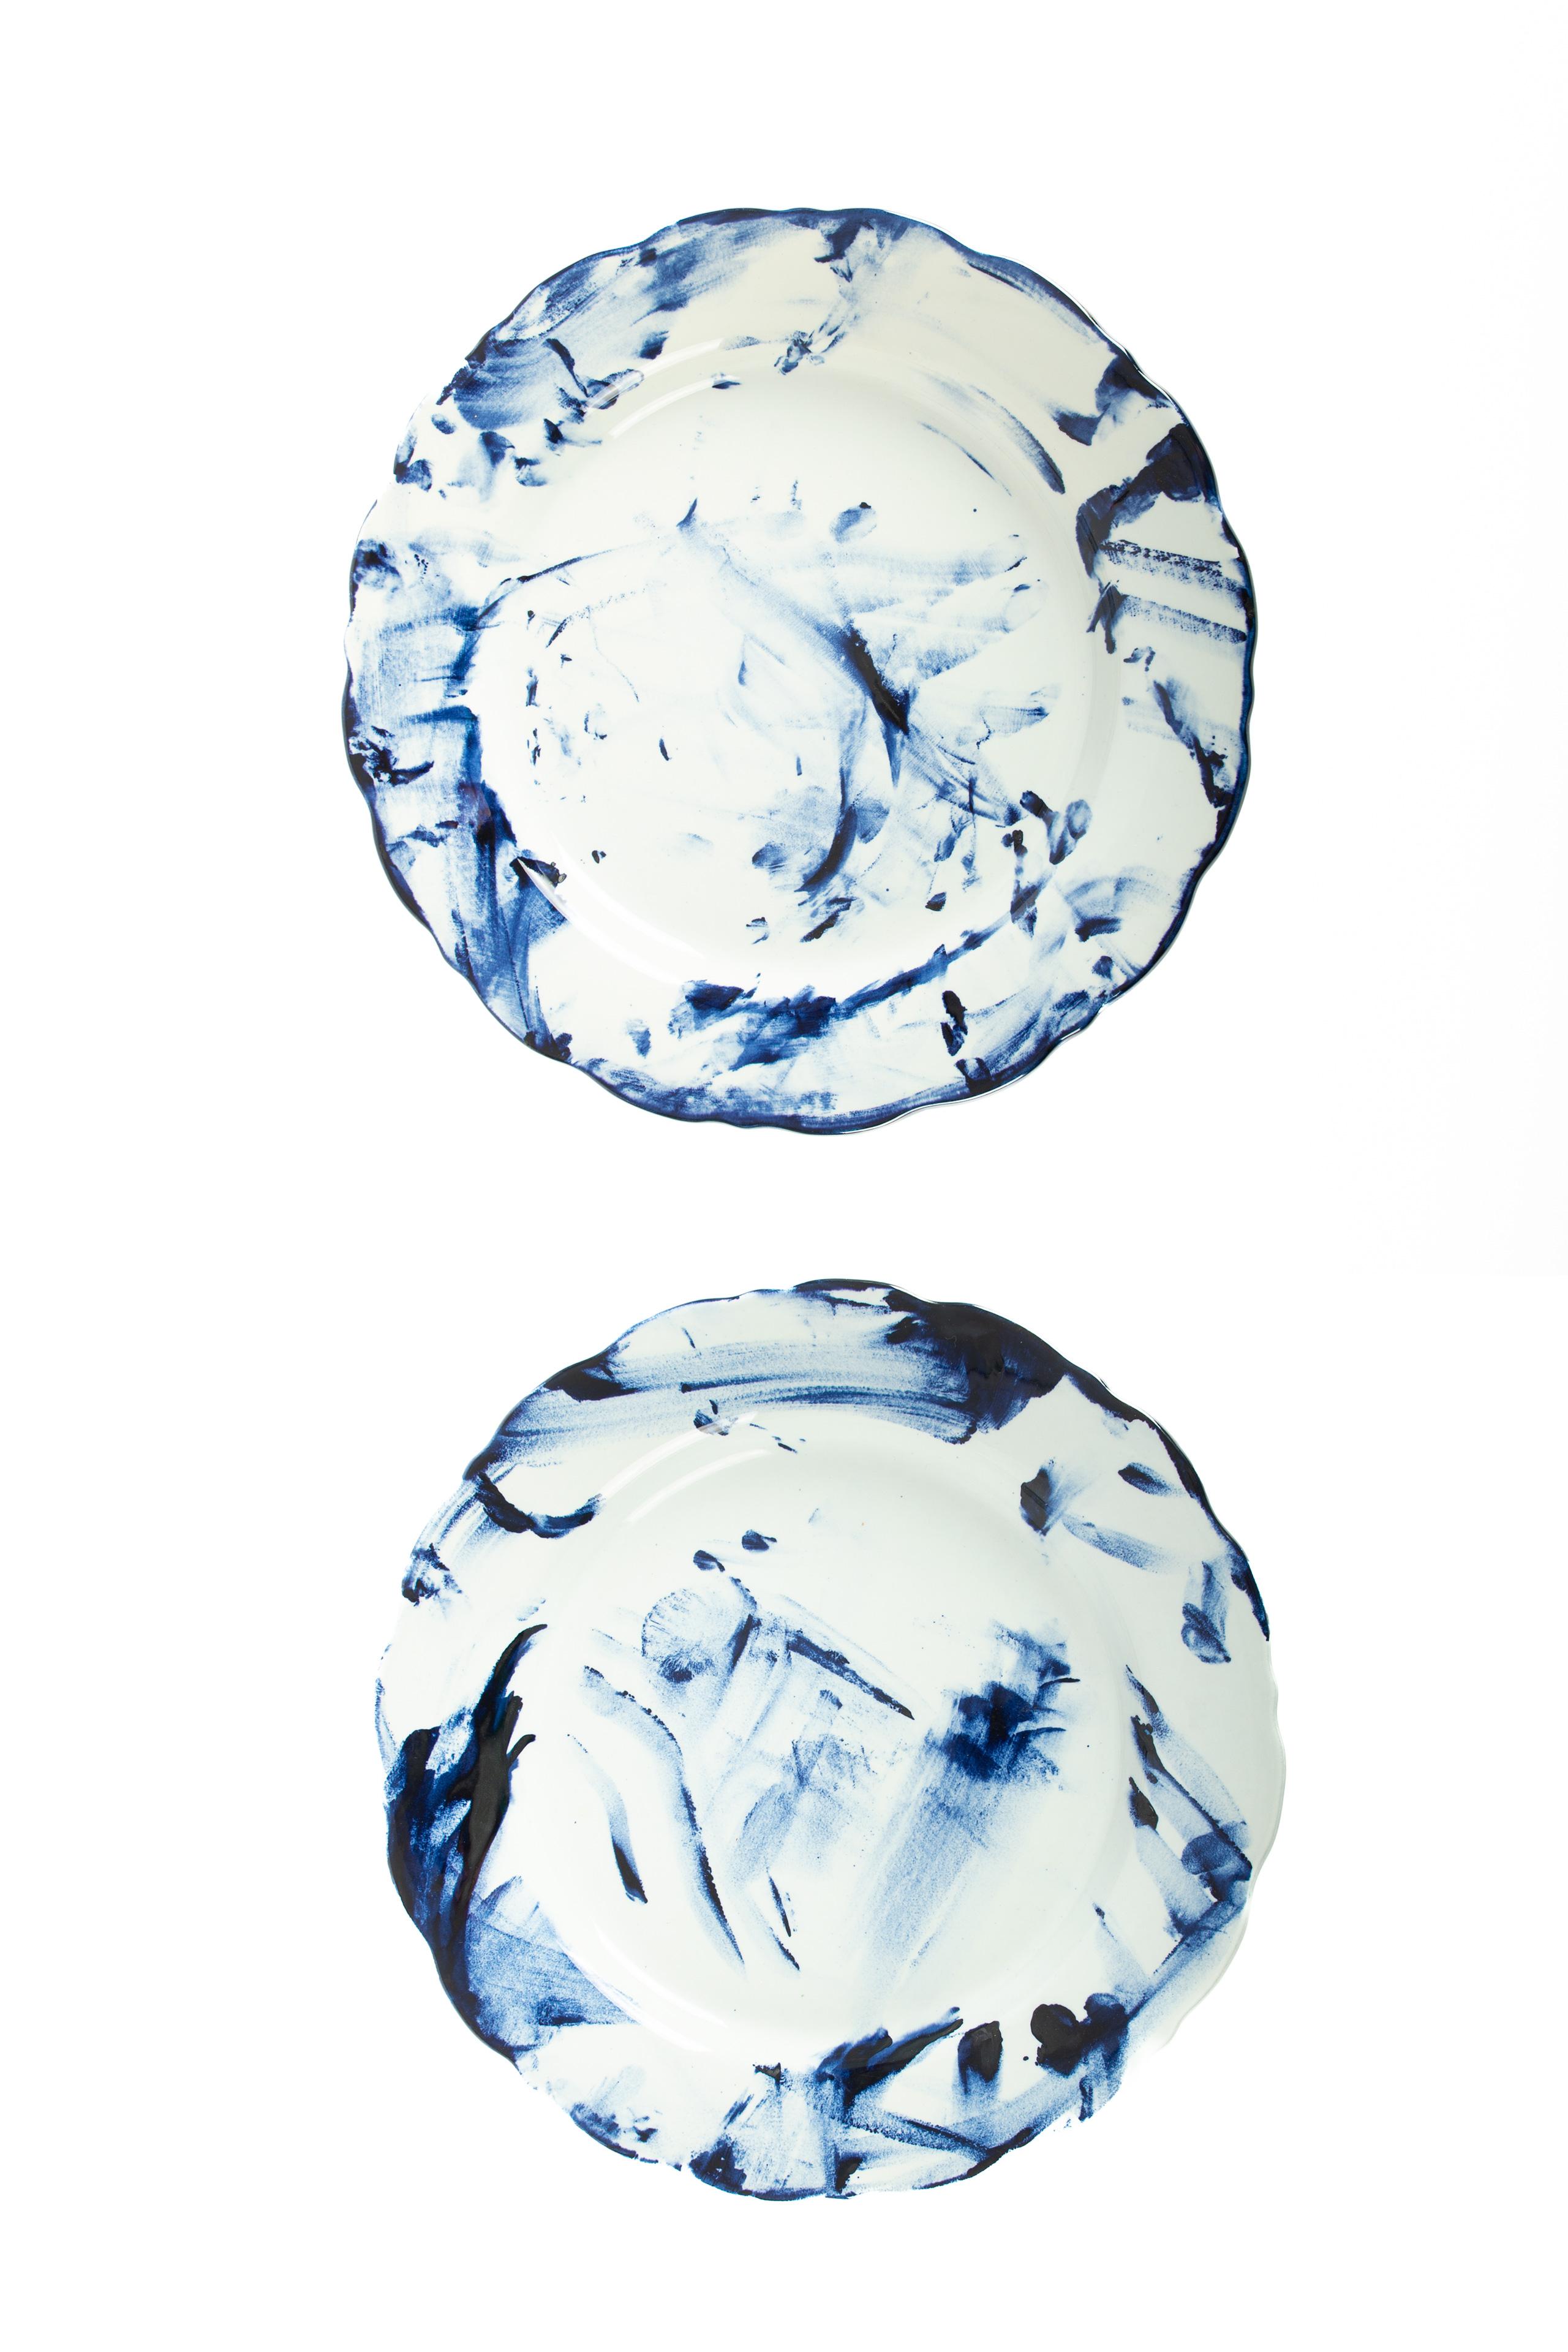 One Minute Delft Blue Plate is available as an exclusive Personal Edition, Marcel Wanders' label carrying works of a more personal and experimental nature. The pieces of the Delft Blue series are unlimited unique by Marcel's one minute delft blue